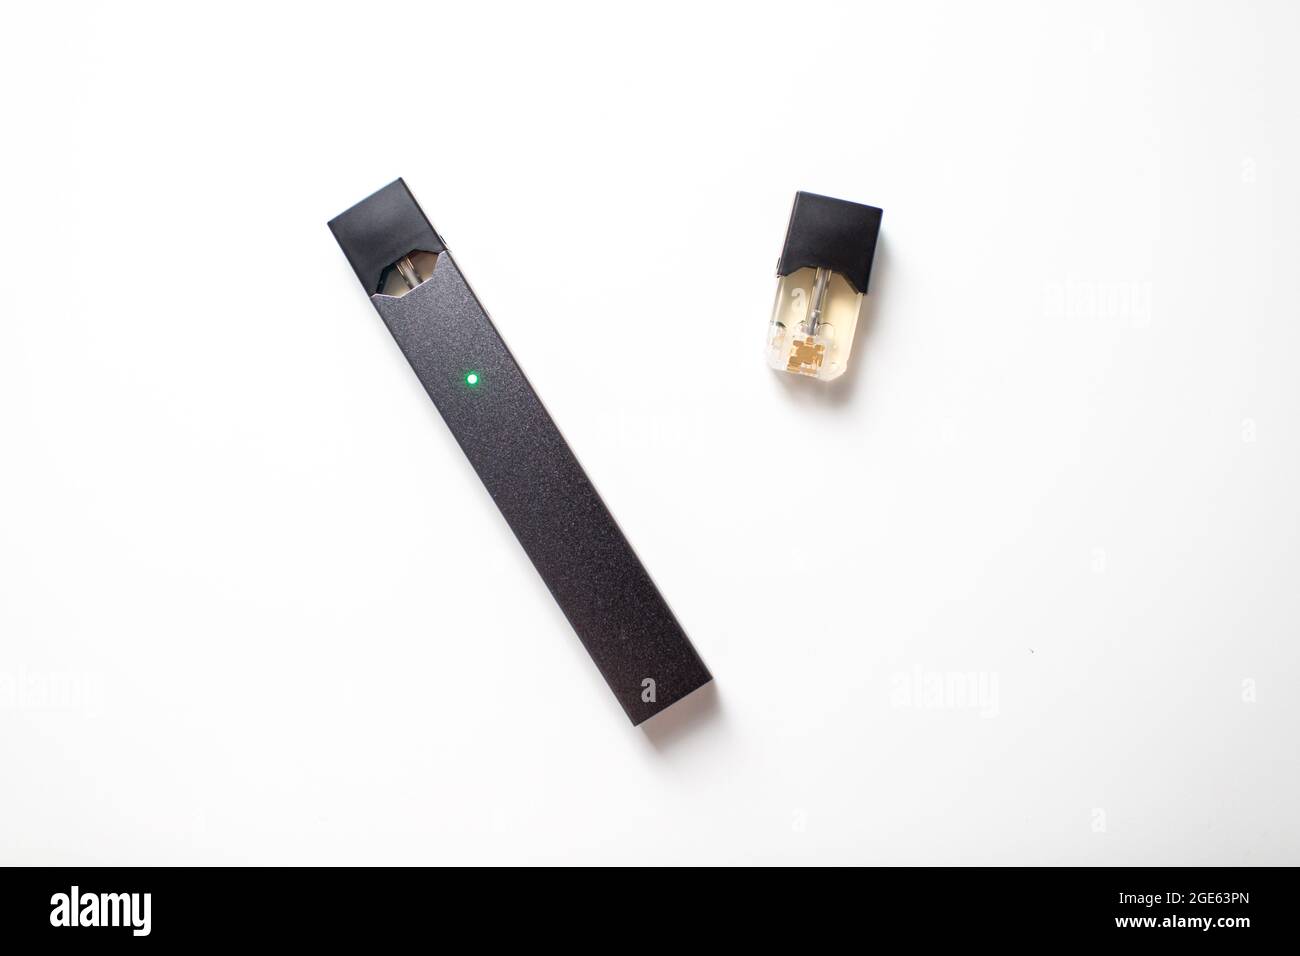 MOSCOW - 26 June 2020: Juul e-cigarette nicotine vapor stick and pods. Stock Photo